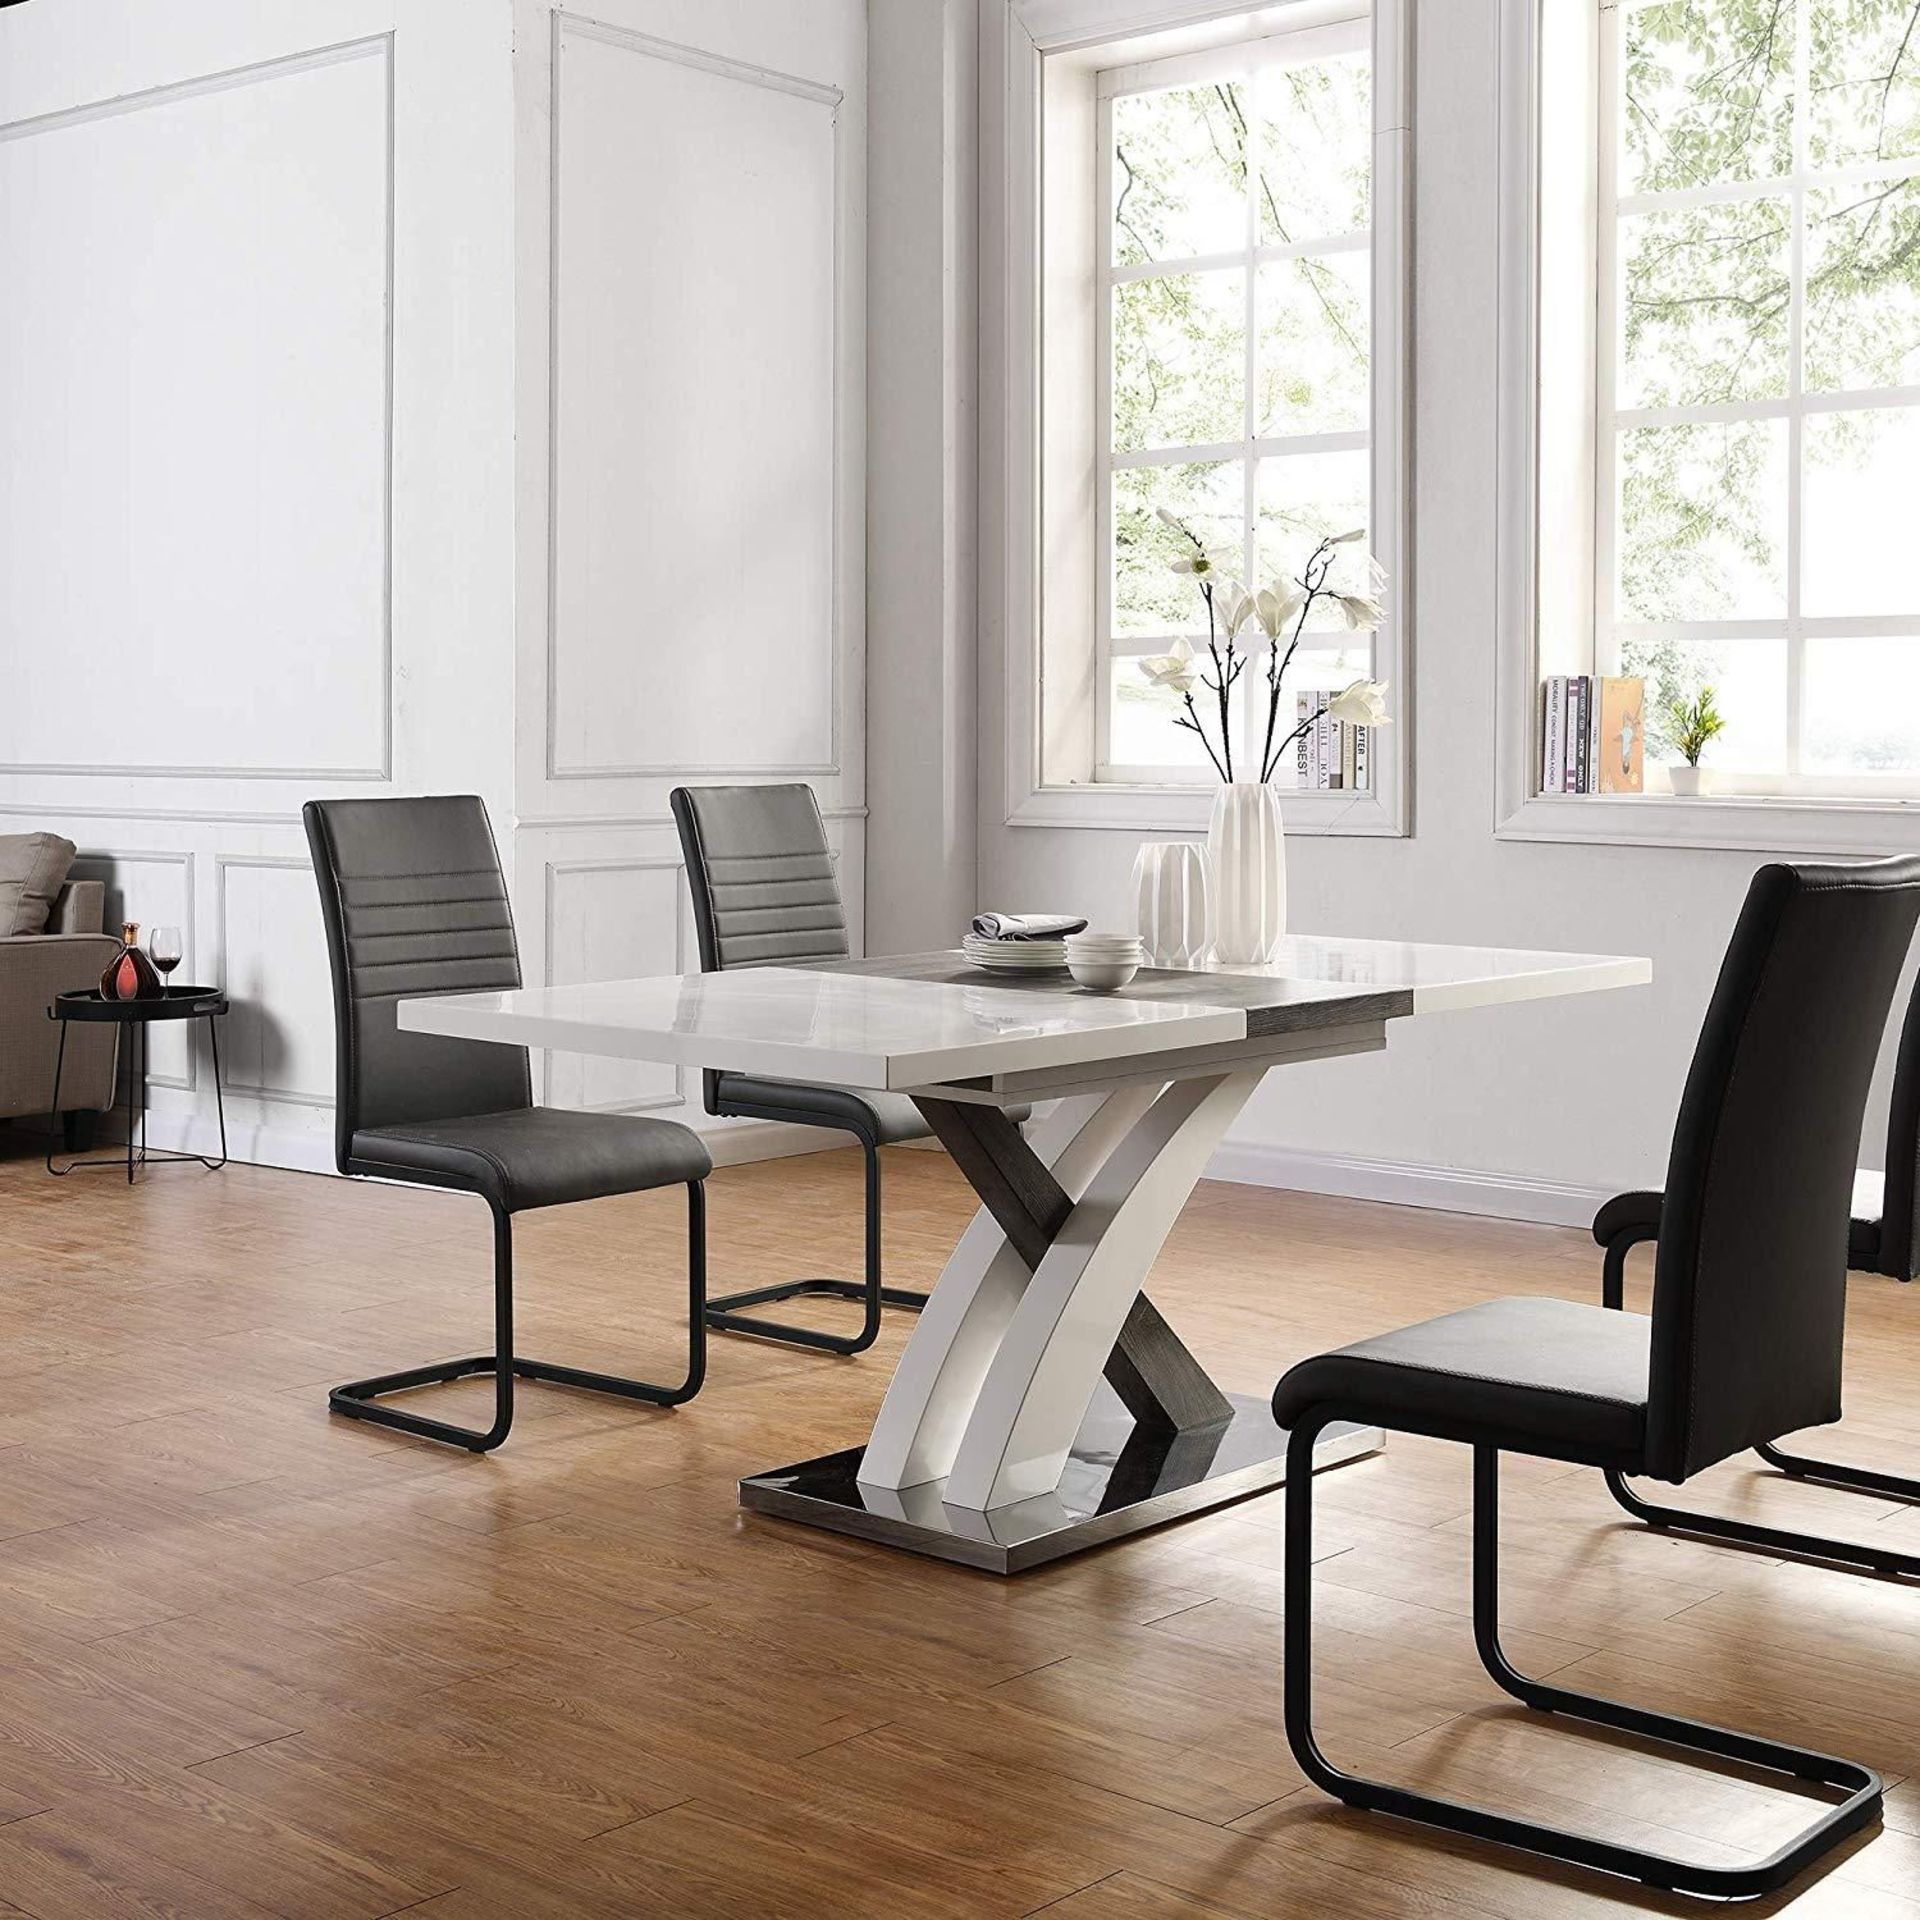 BASEL High Gloss White Extendable Dining Table 6 to 8-Seater with Stainless Steel Base. -ER25.